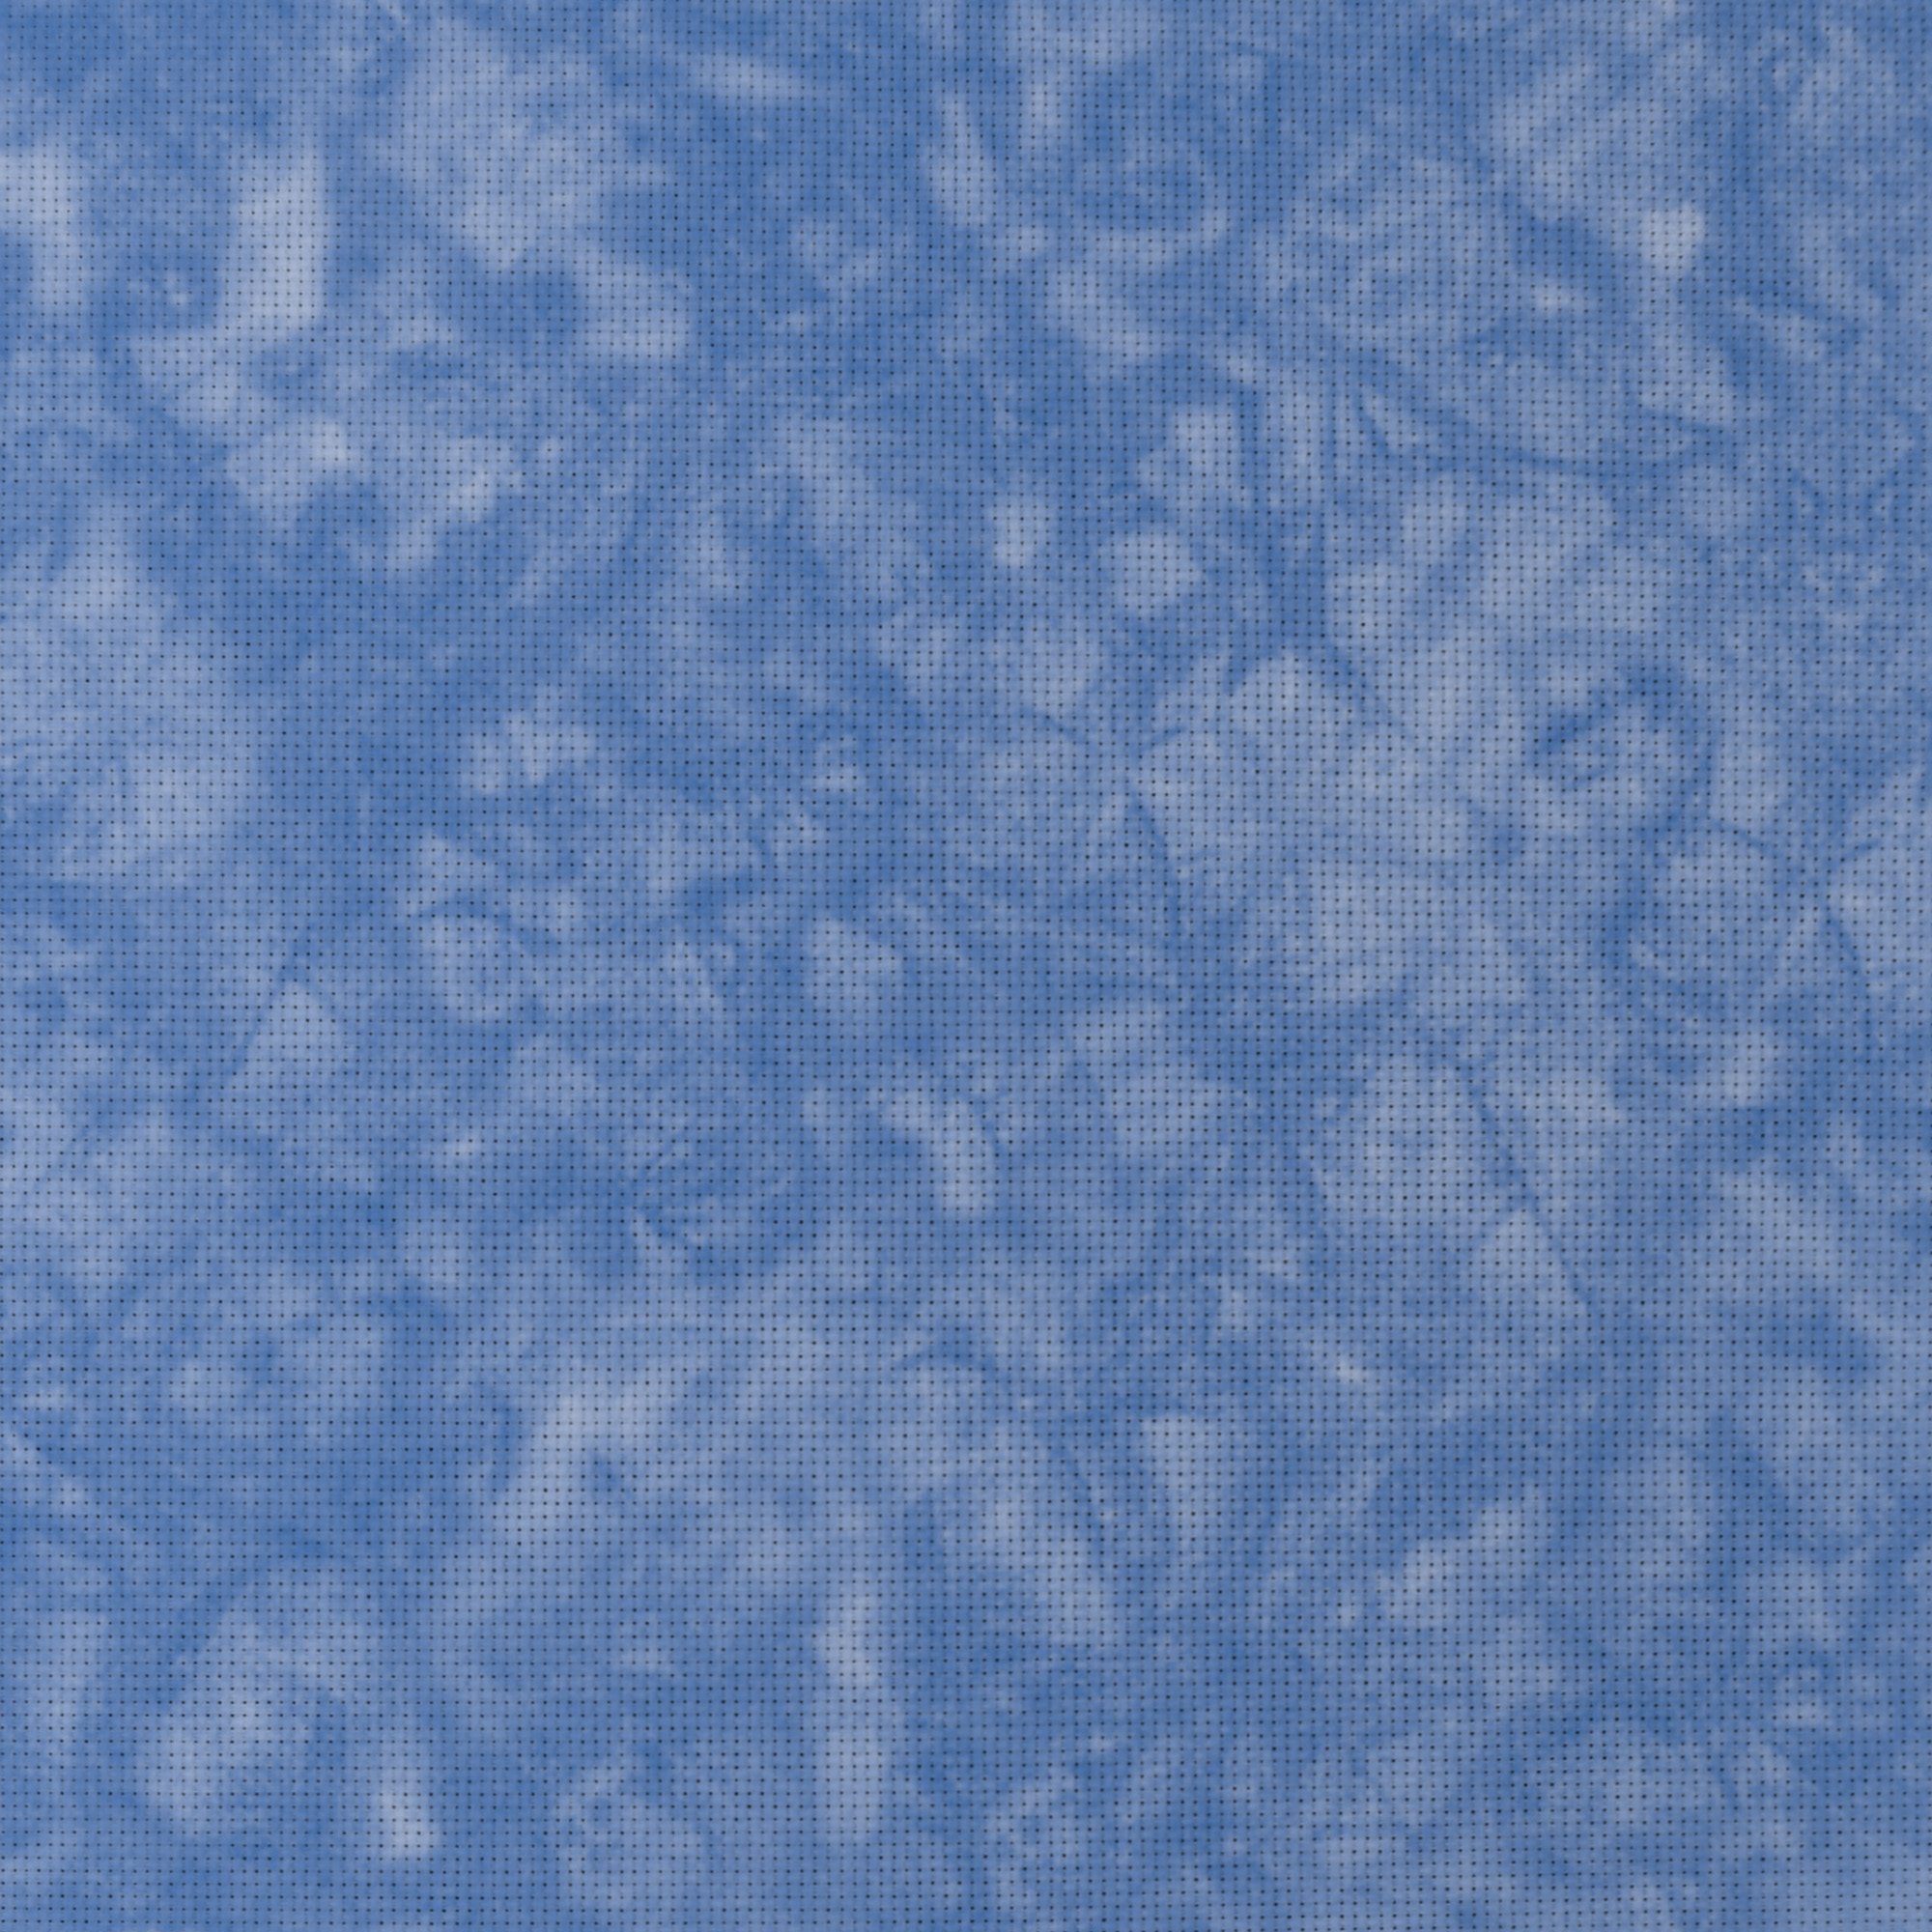 18 Count Bahama Blue Hand Dyed Effect Cross Stitch Fabric